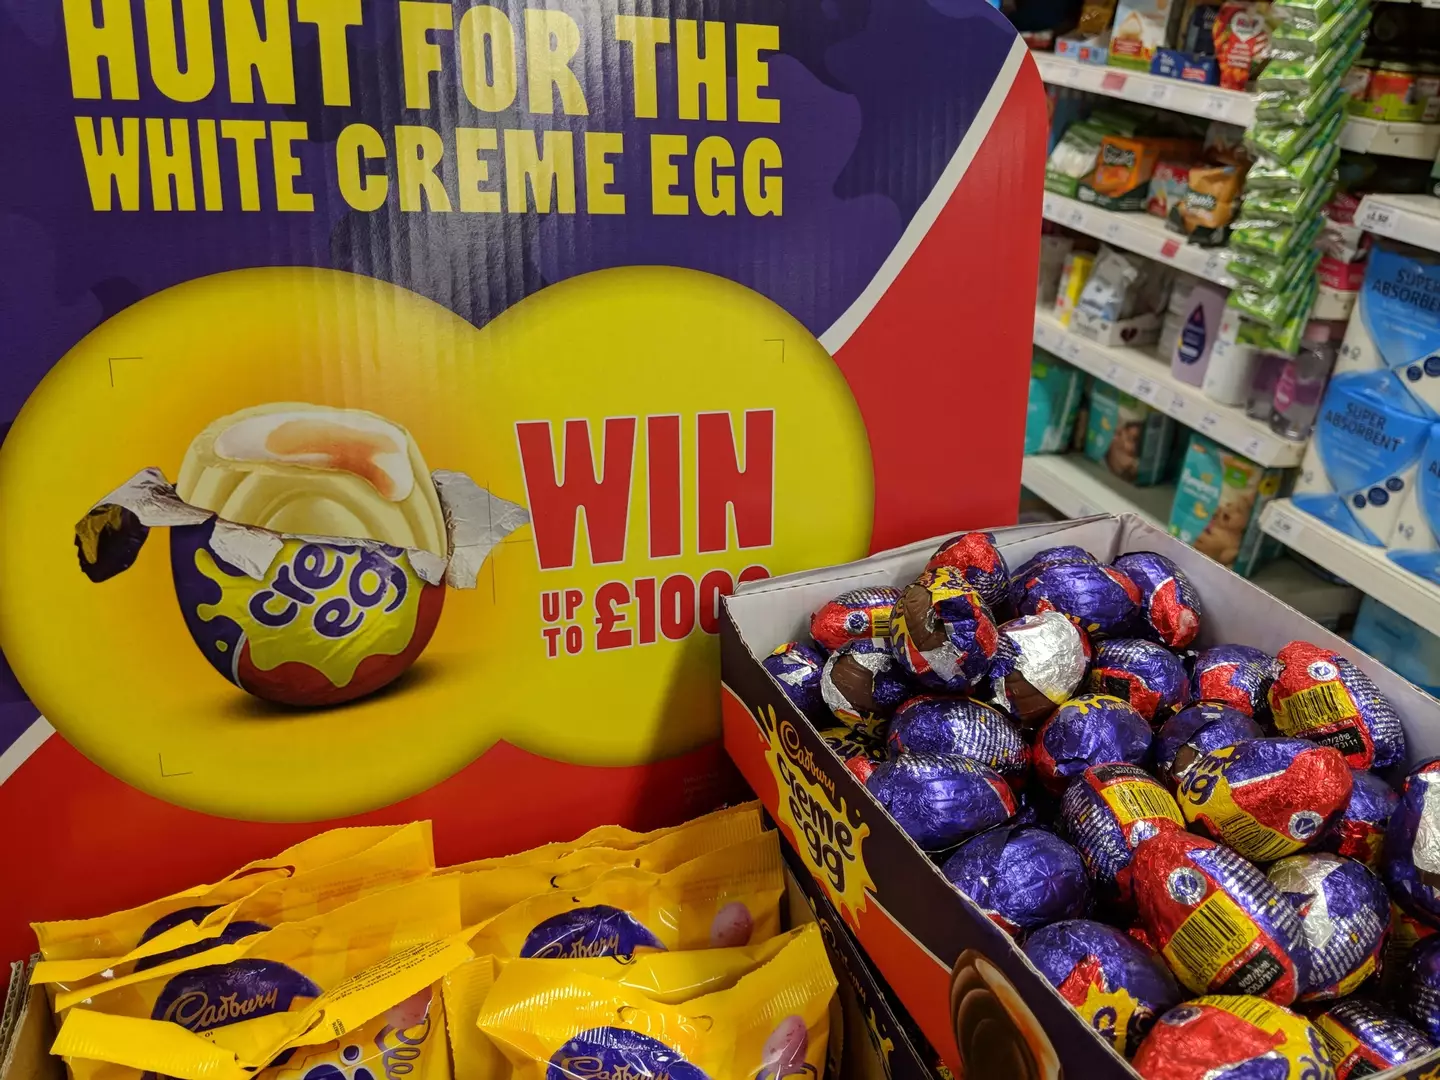 White chocolate creme eggs have been pretty rare in the past.